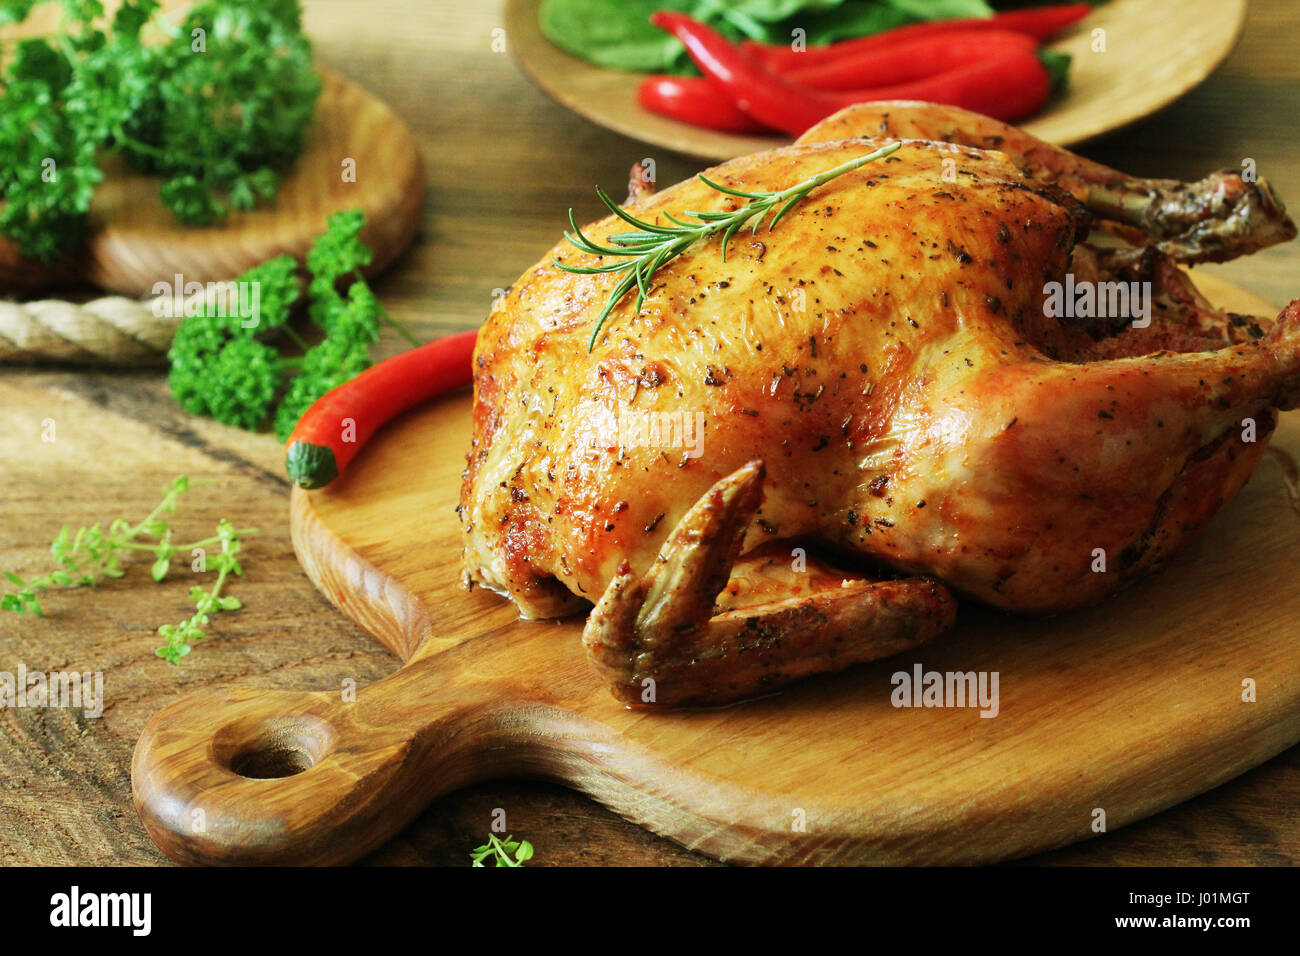 Whole roasted chicken on cutting board Stock Photo - Alamy